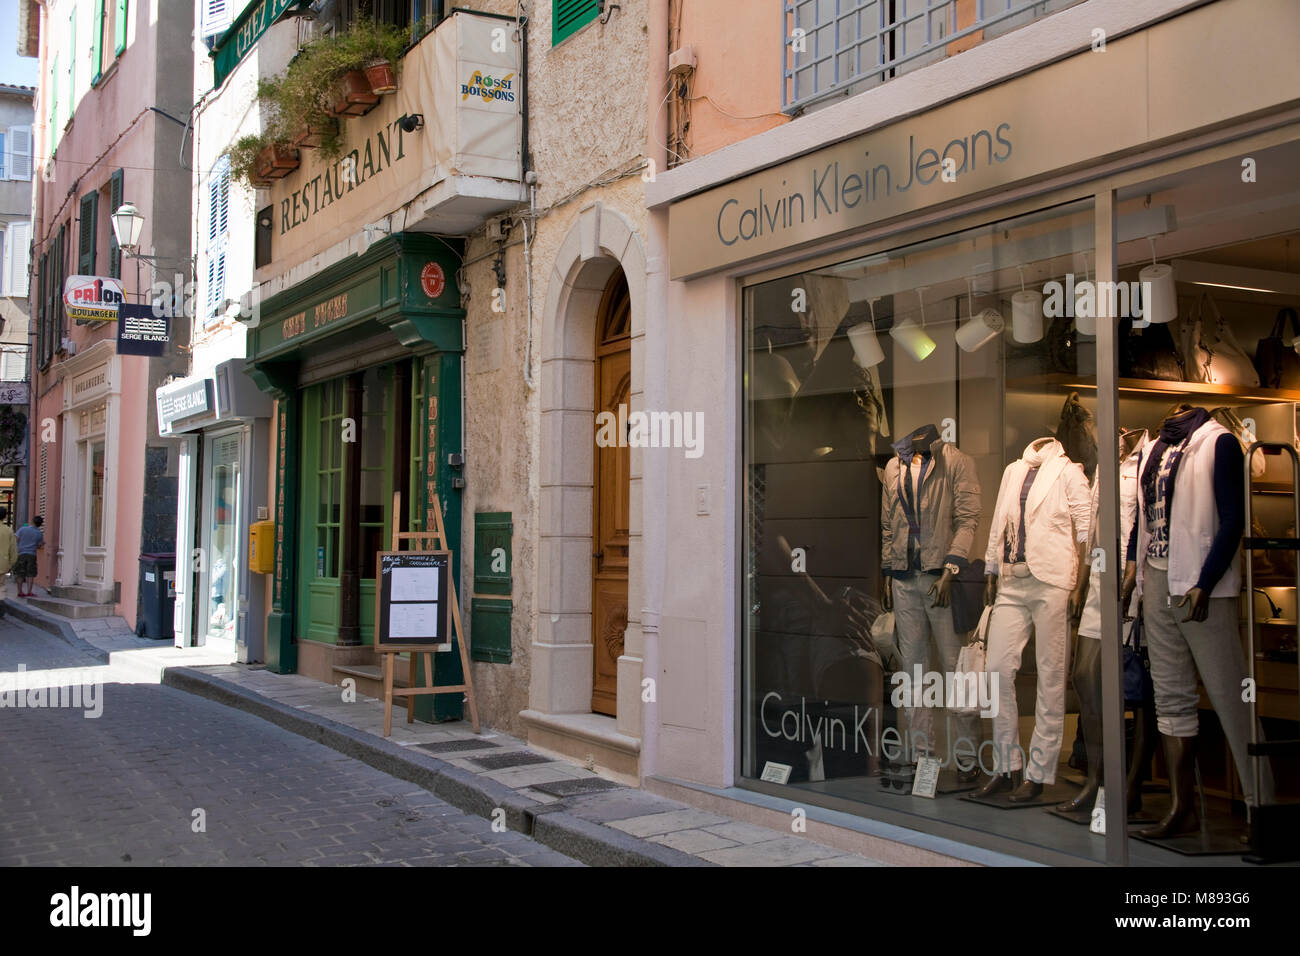 Calvin Klein Shop High Resolution Stock Photography and Images - Alamy